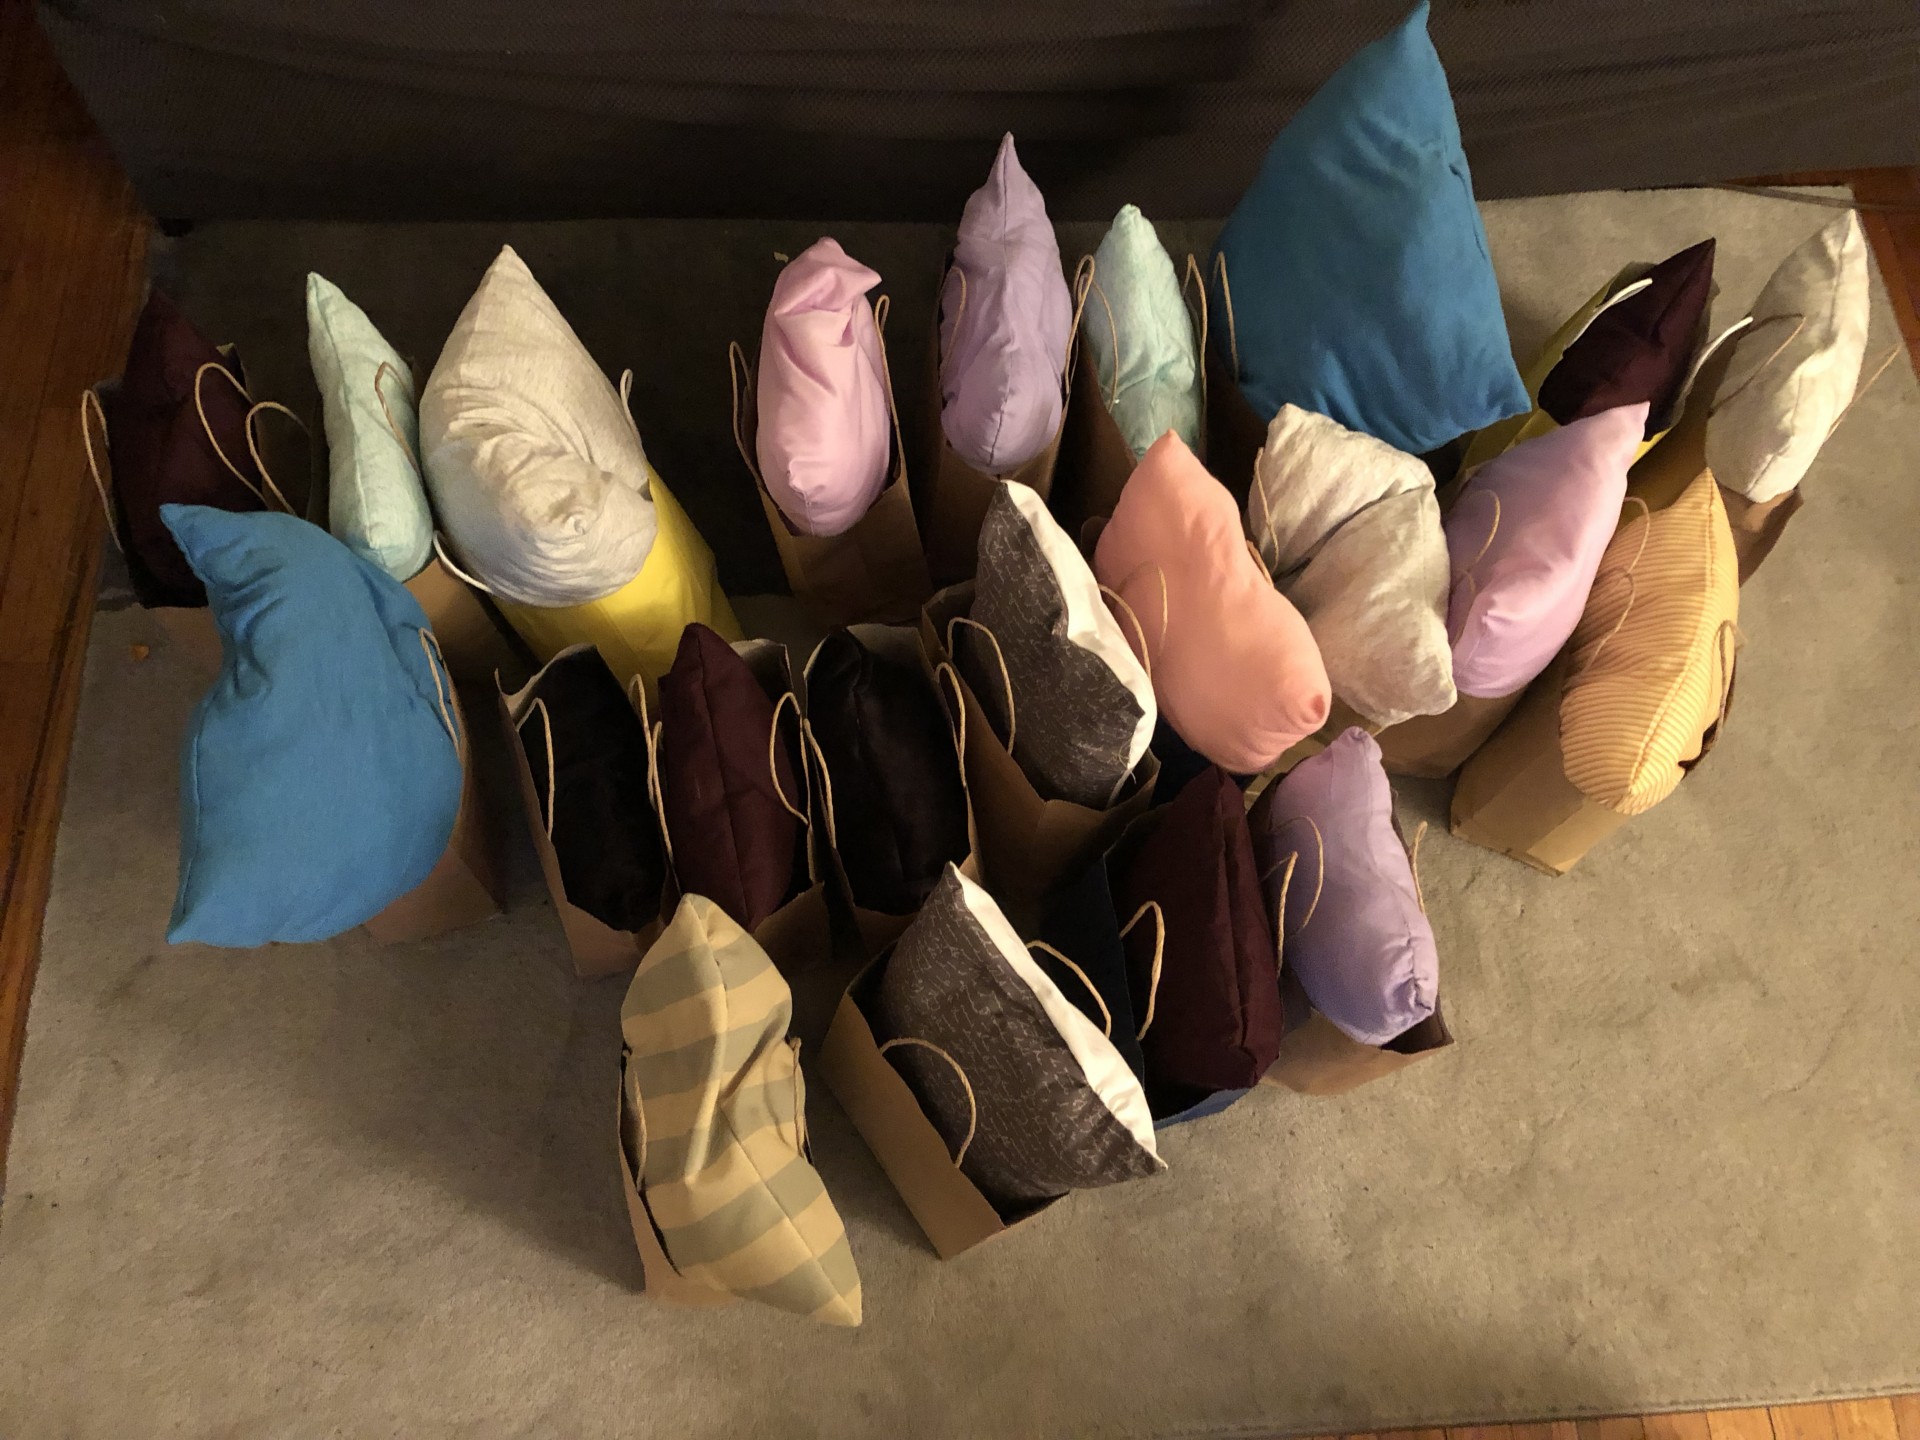 This is a picture of 22 pillows and care packages I made for a local women’s shelter.